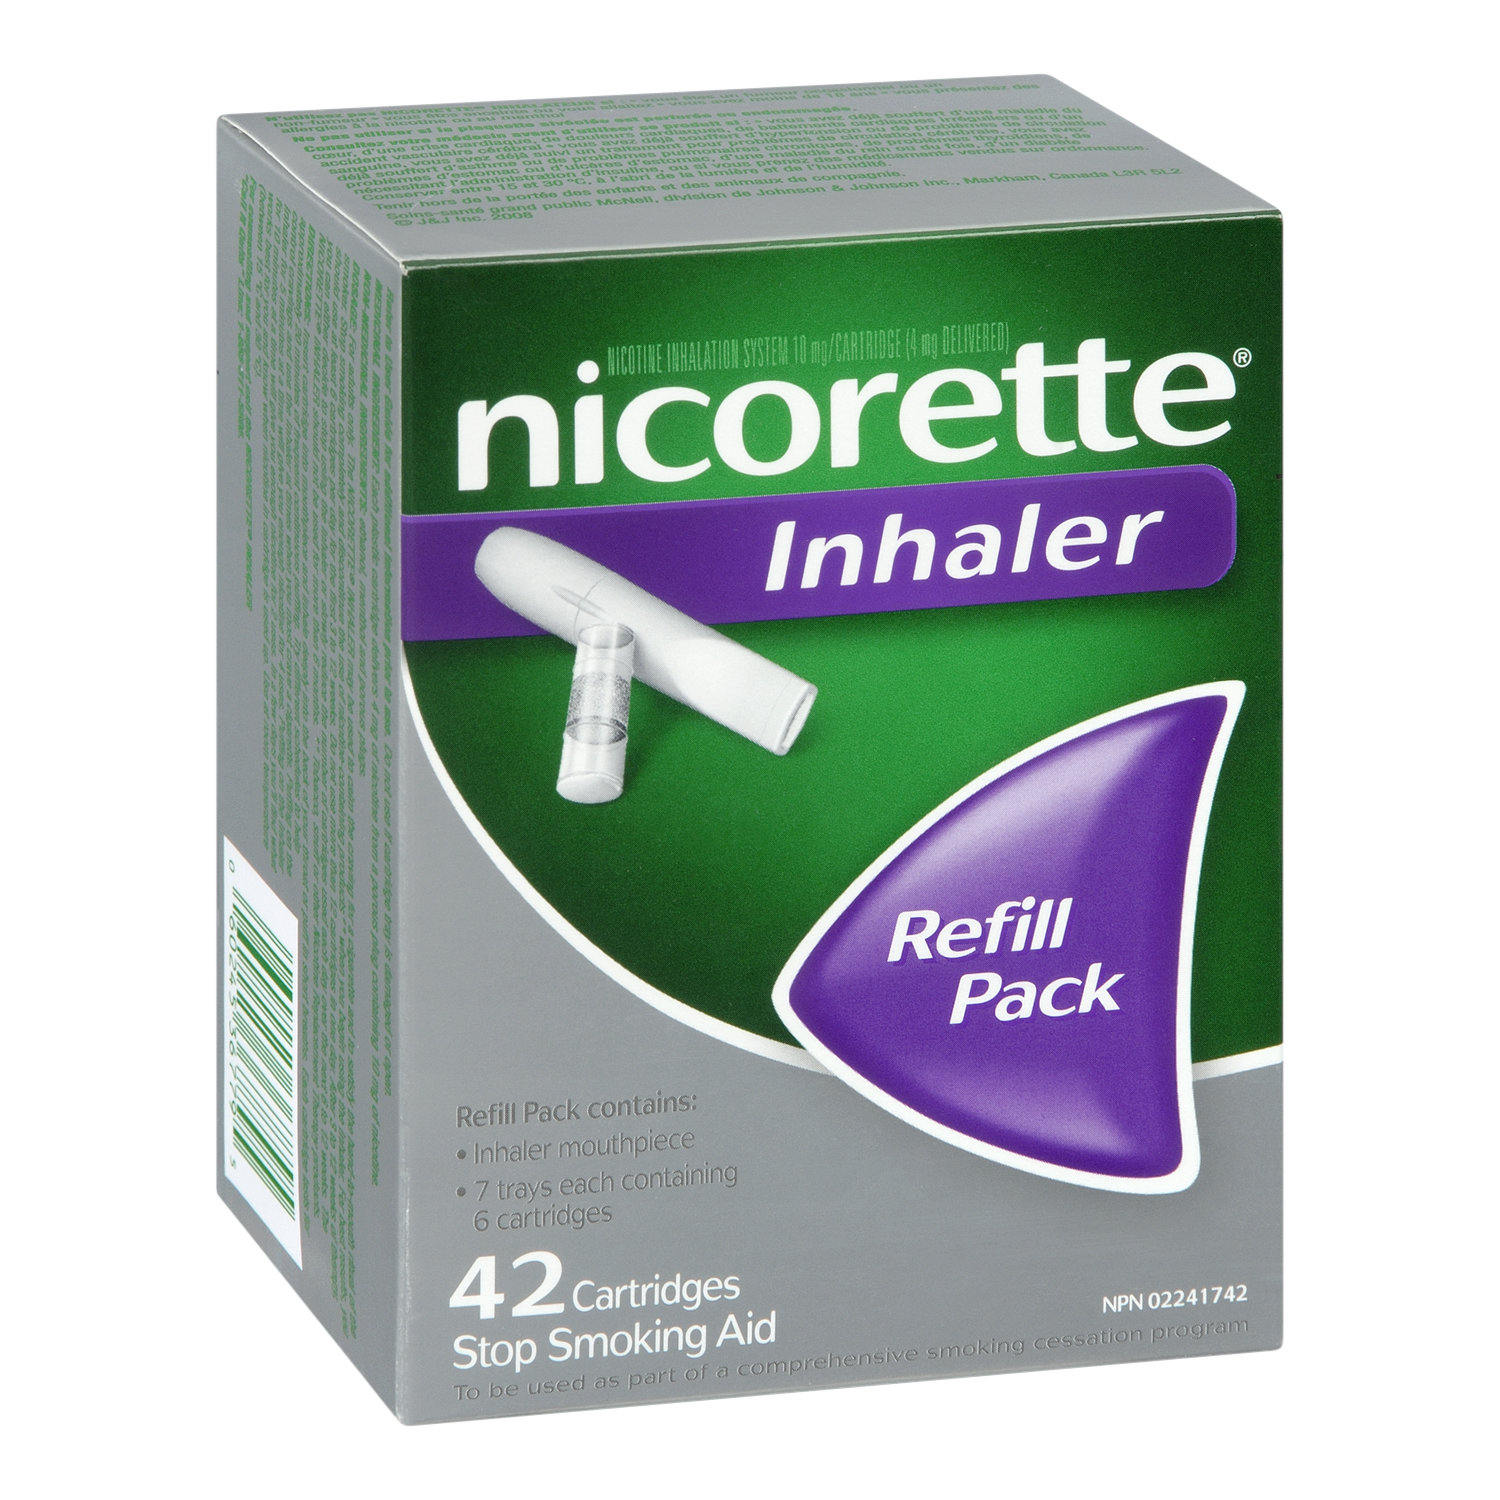 Purchase Nicorette InhalerBuy Nicorette Inhalers and other Nicorette  Products from PharmacyDiscounter.com